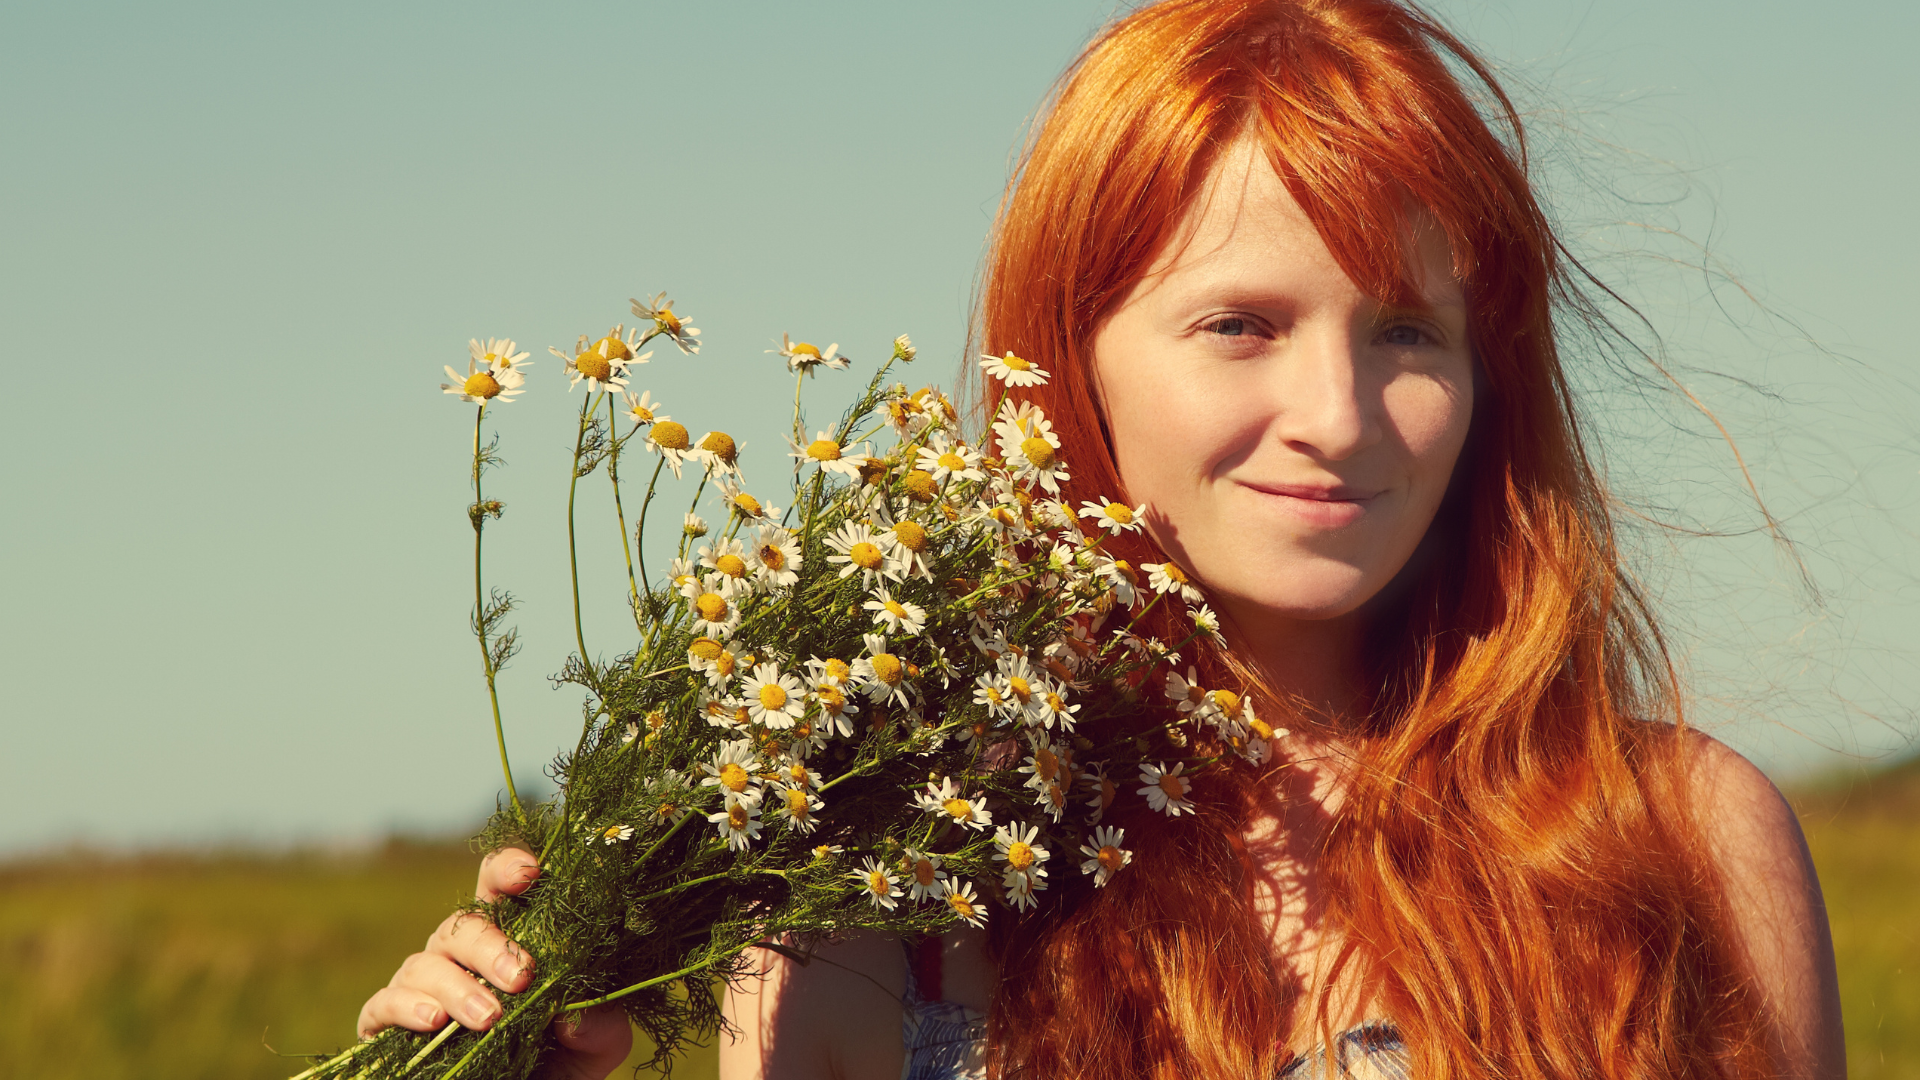 Puffy Eyes Due To Allergy Season? Here’s How Redheads Can Treat It